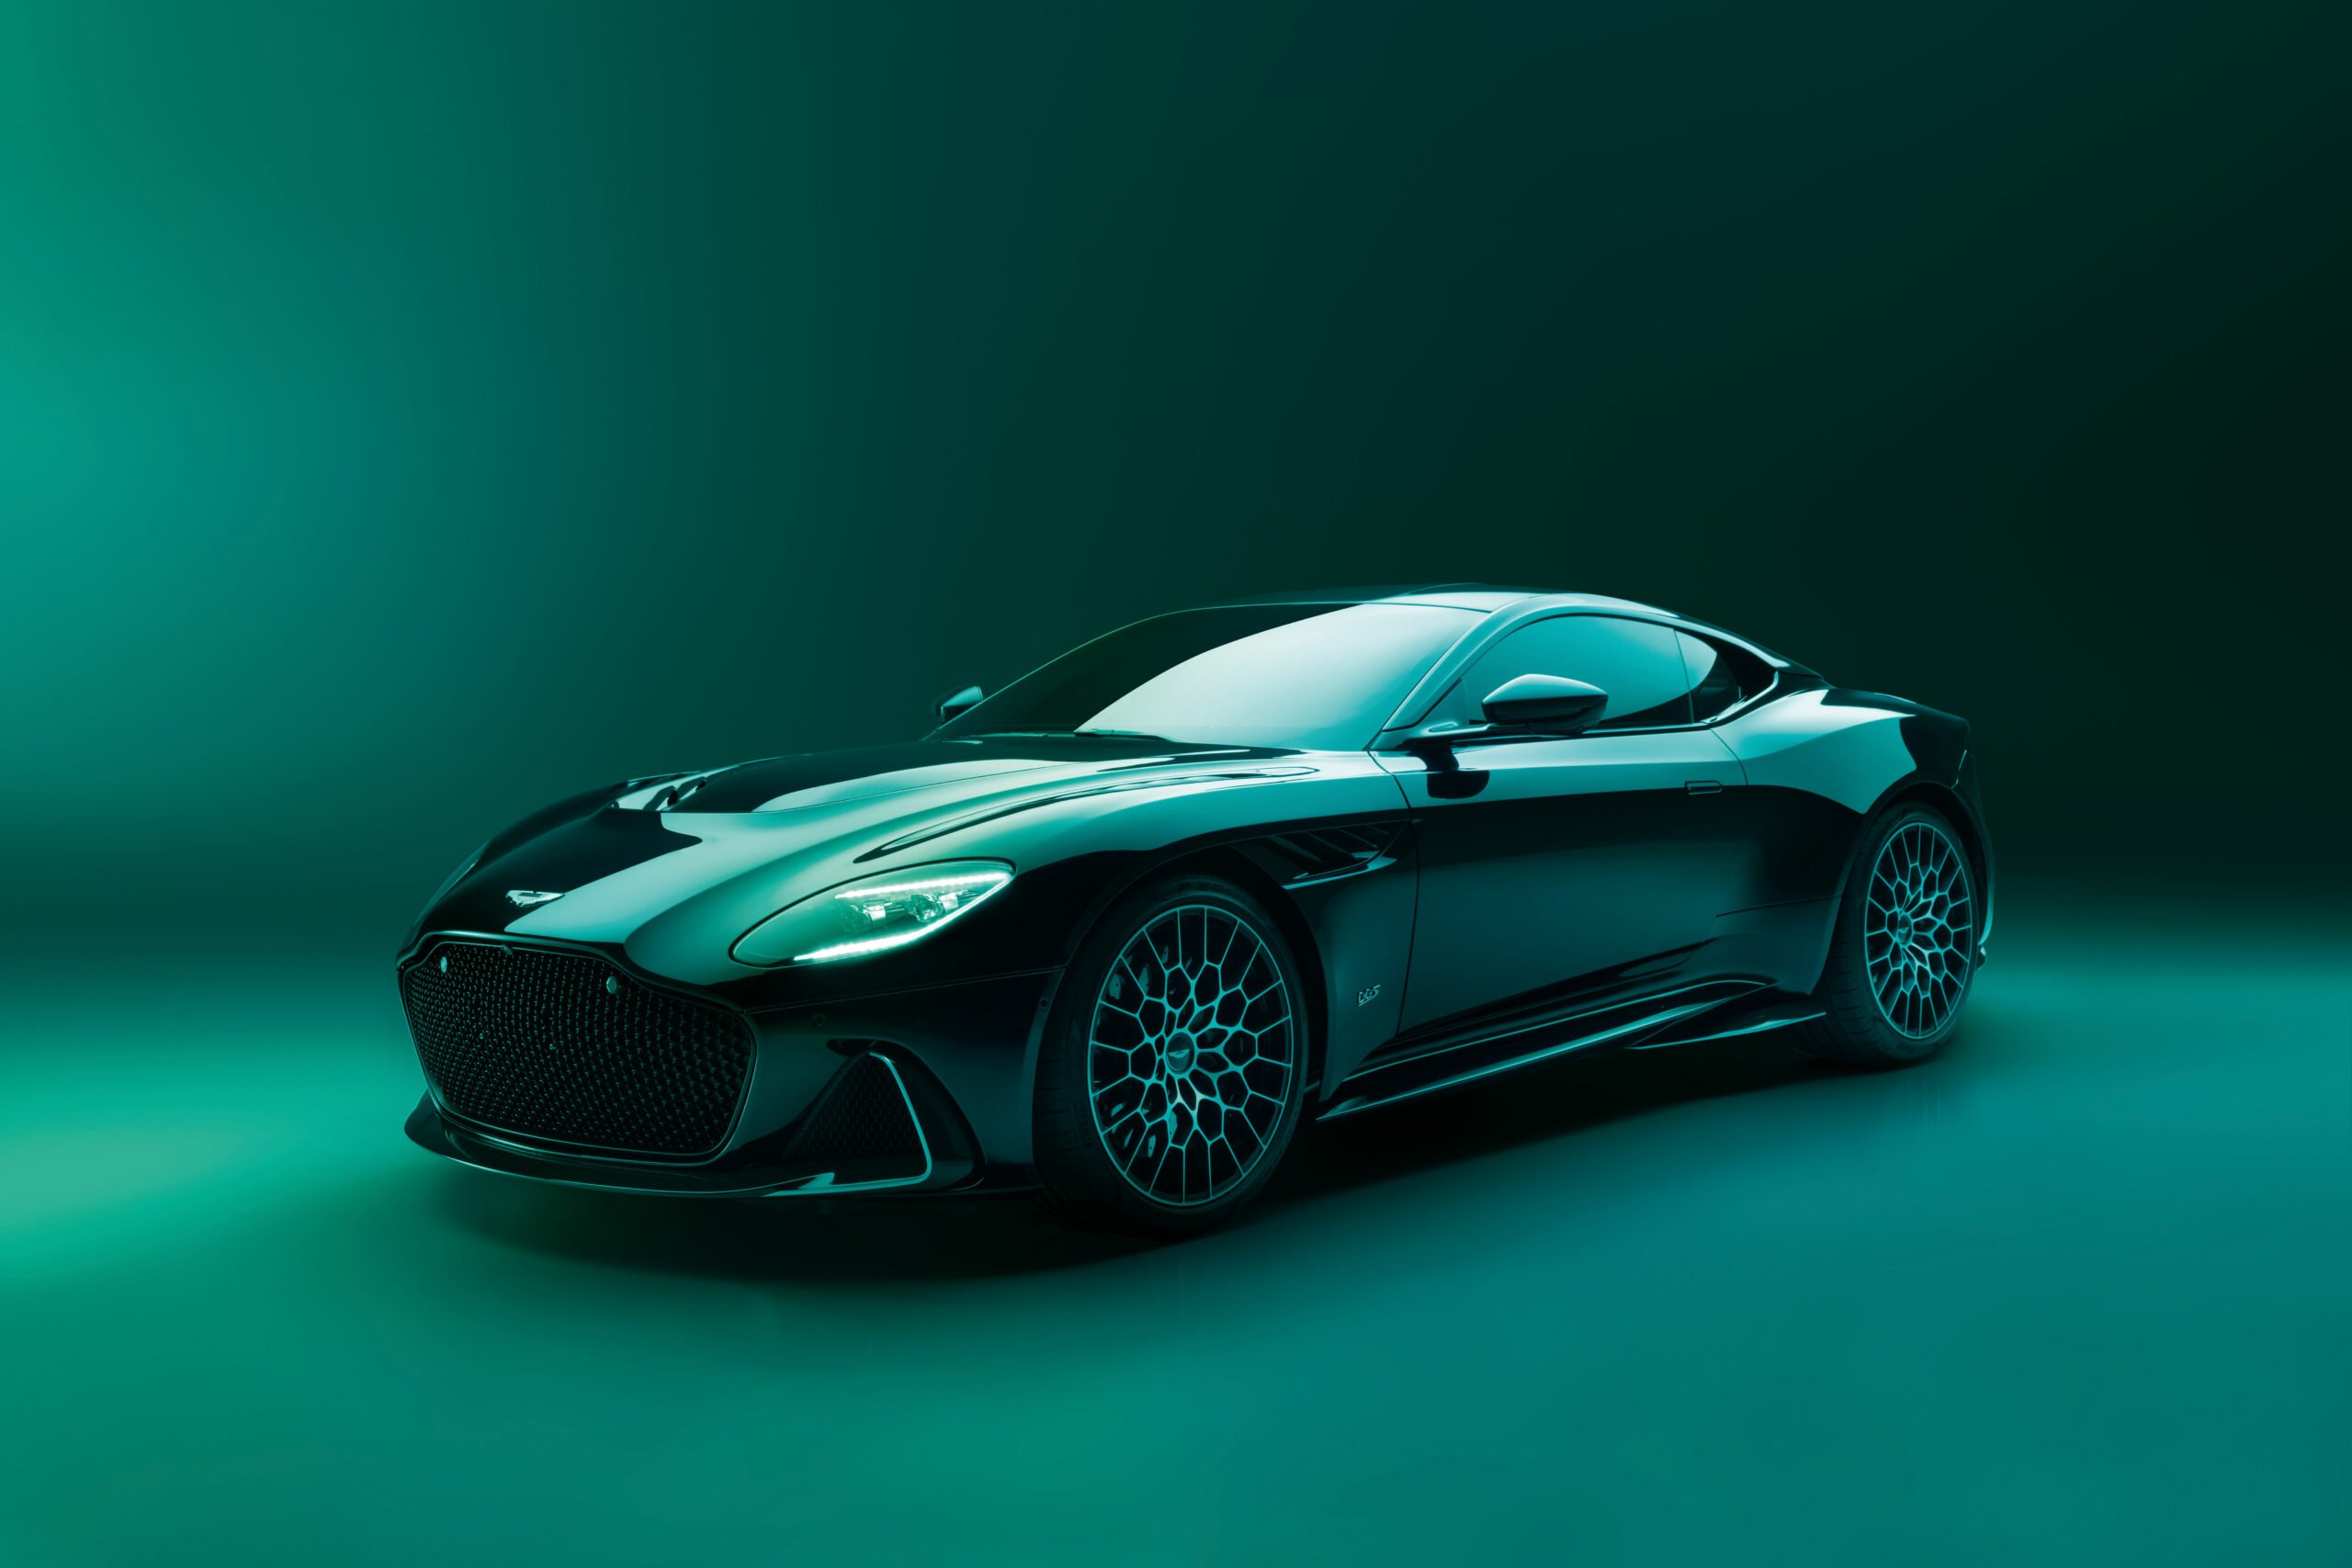 Aston Martin DBS 770 Ultimate raises 750,000 Swiss Francs at charity auction